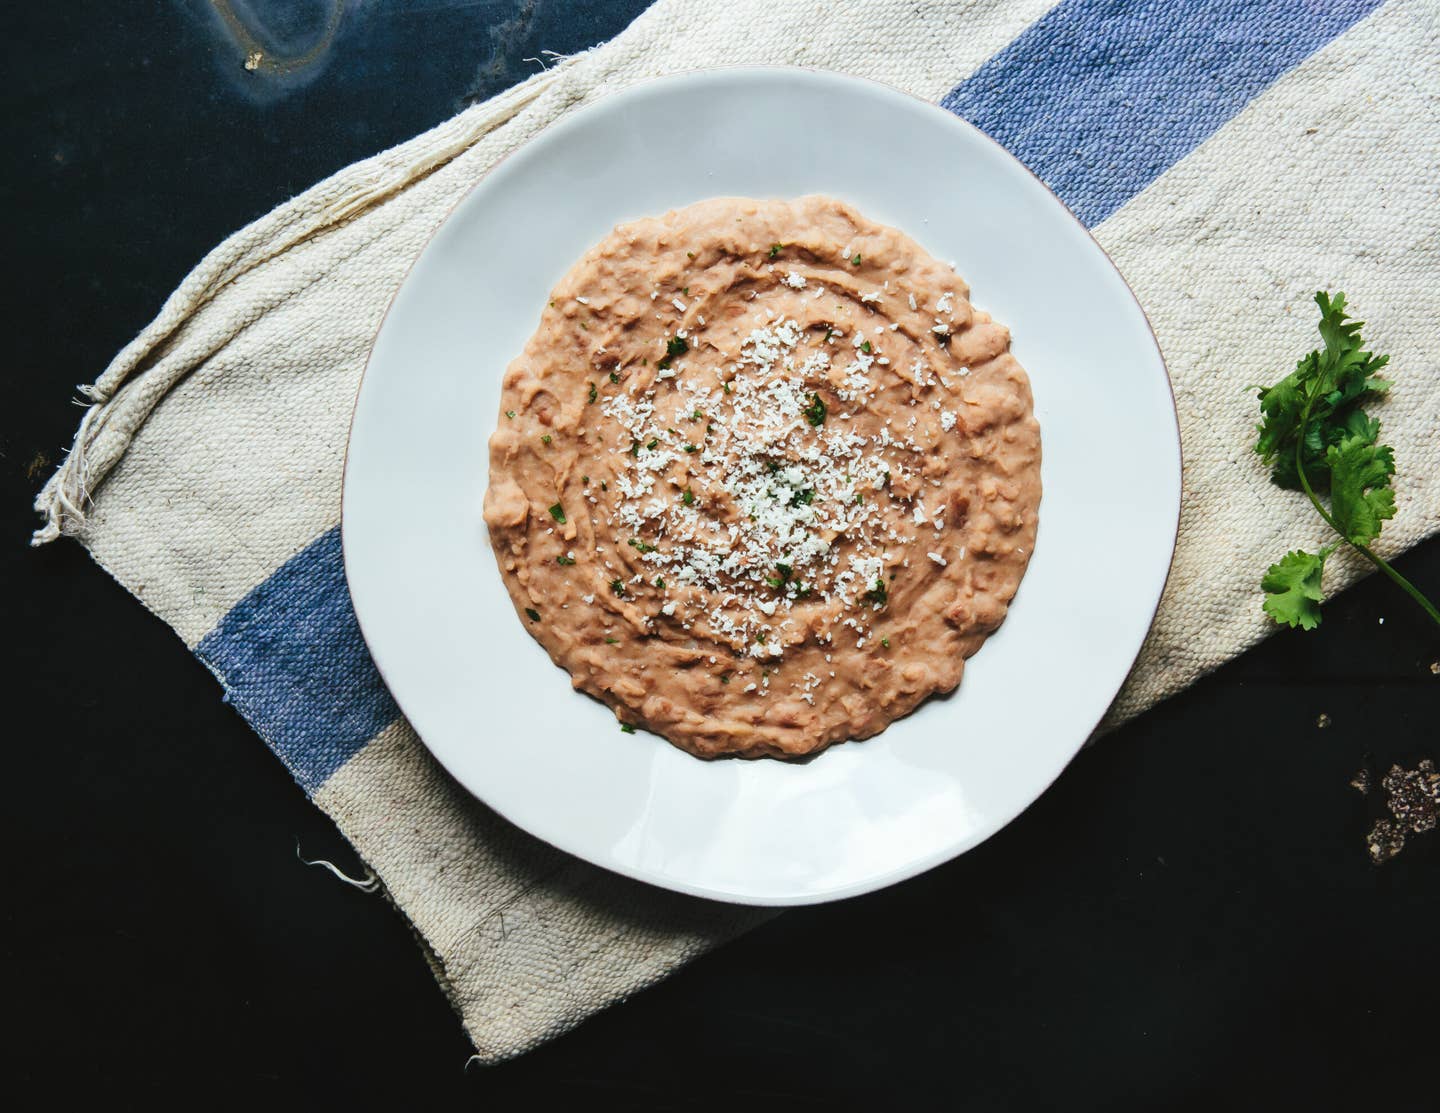 Are These the World’s Best Refried Beans?